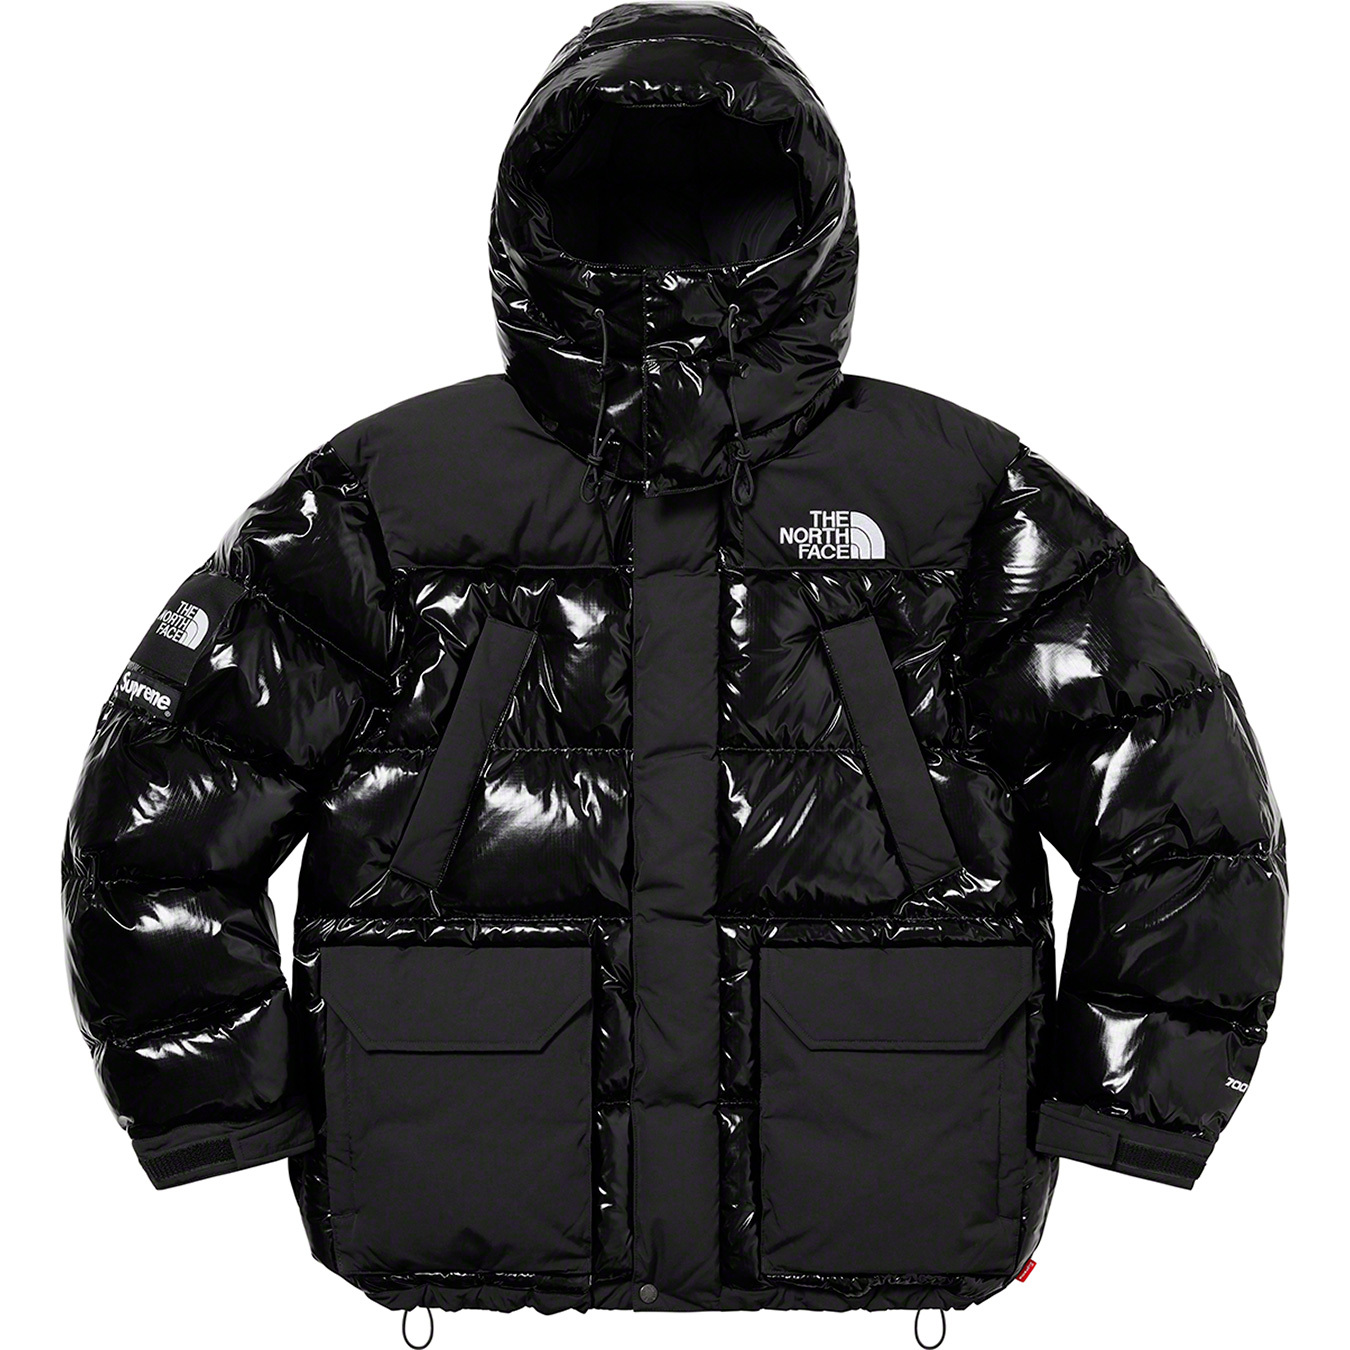 THE NORTH FACE US　700 FIL